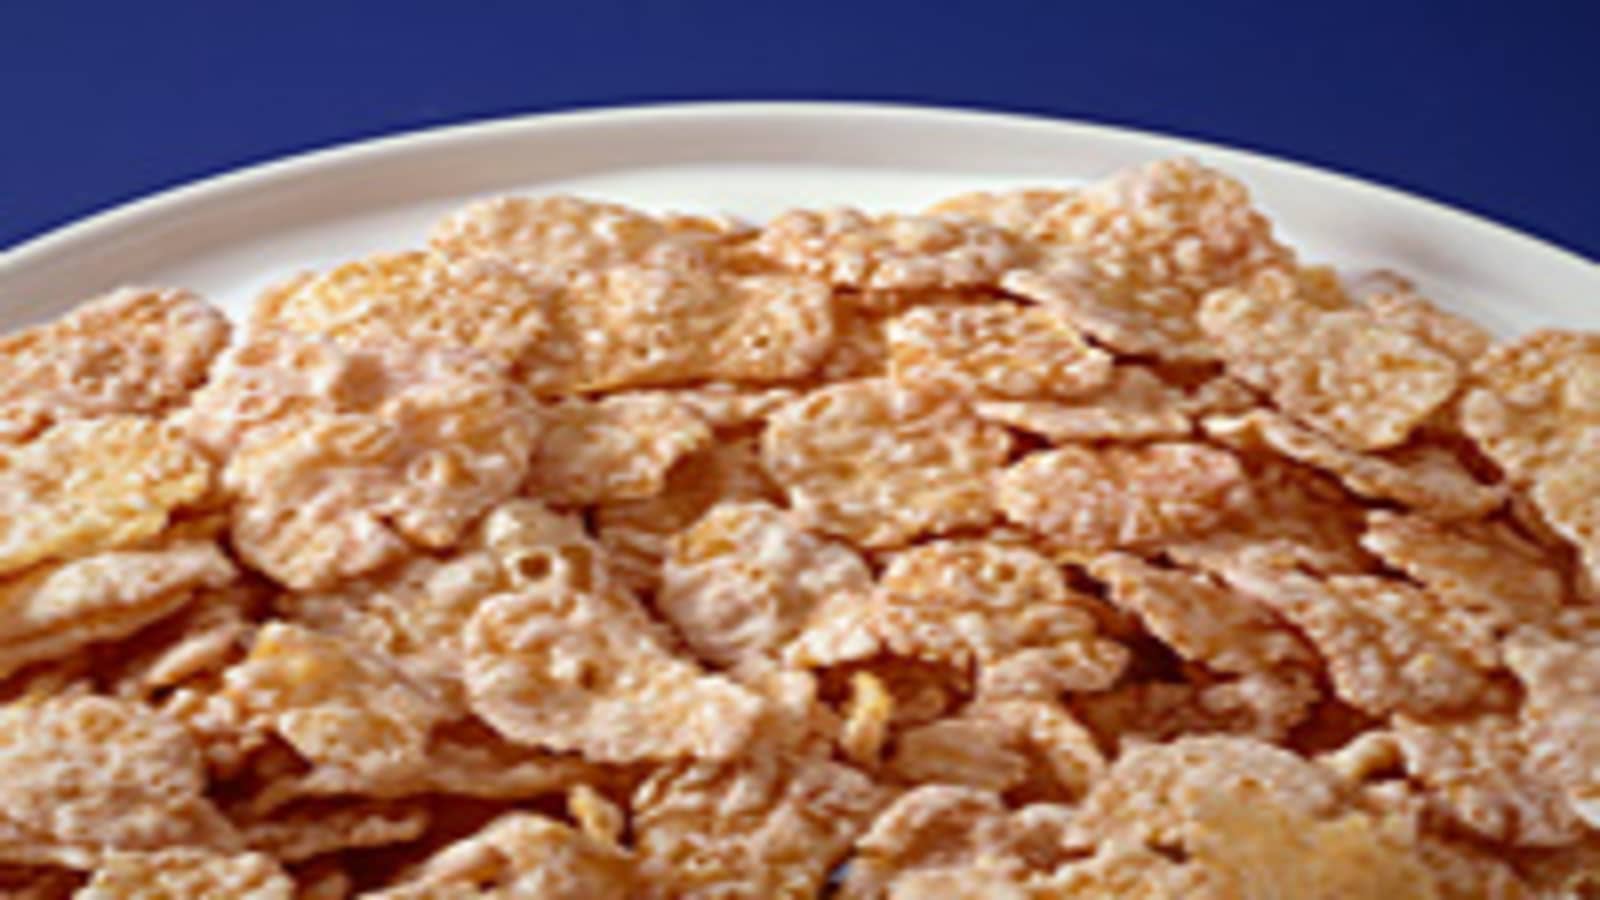 Frosted Flakes Gets More Free Publicity From Shaq